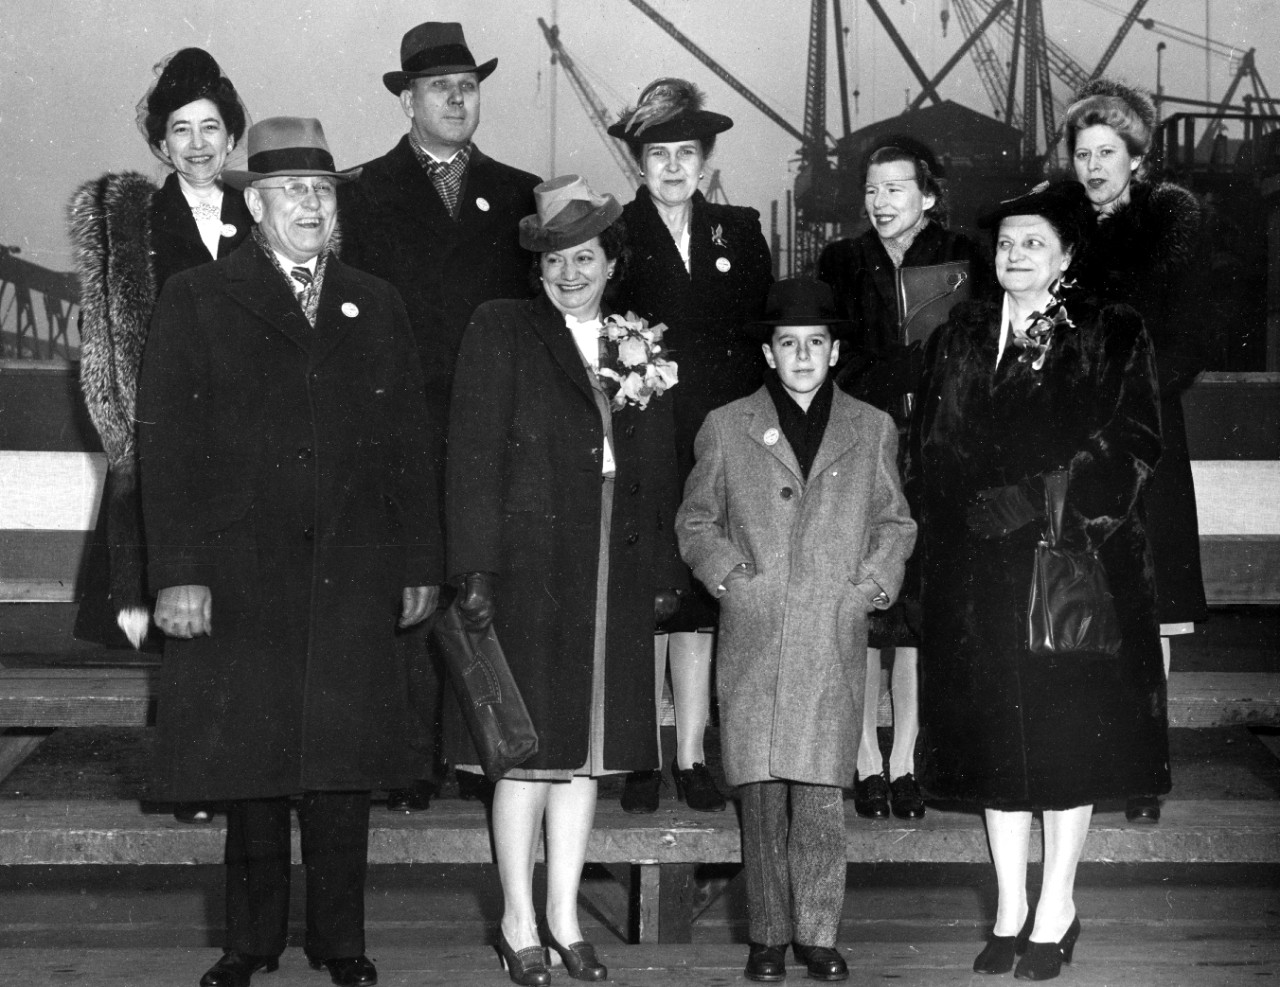 Sponsor party at Kearny on Cooper’s launching day, 9 February 1943, with Mrs. Cooper and her son Glenn front and center. (U.S. Navy Photograph 80-G-220104, National Archives and Records Administration, Still Pictures Division, College Park, Md.)